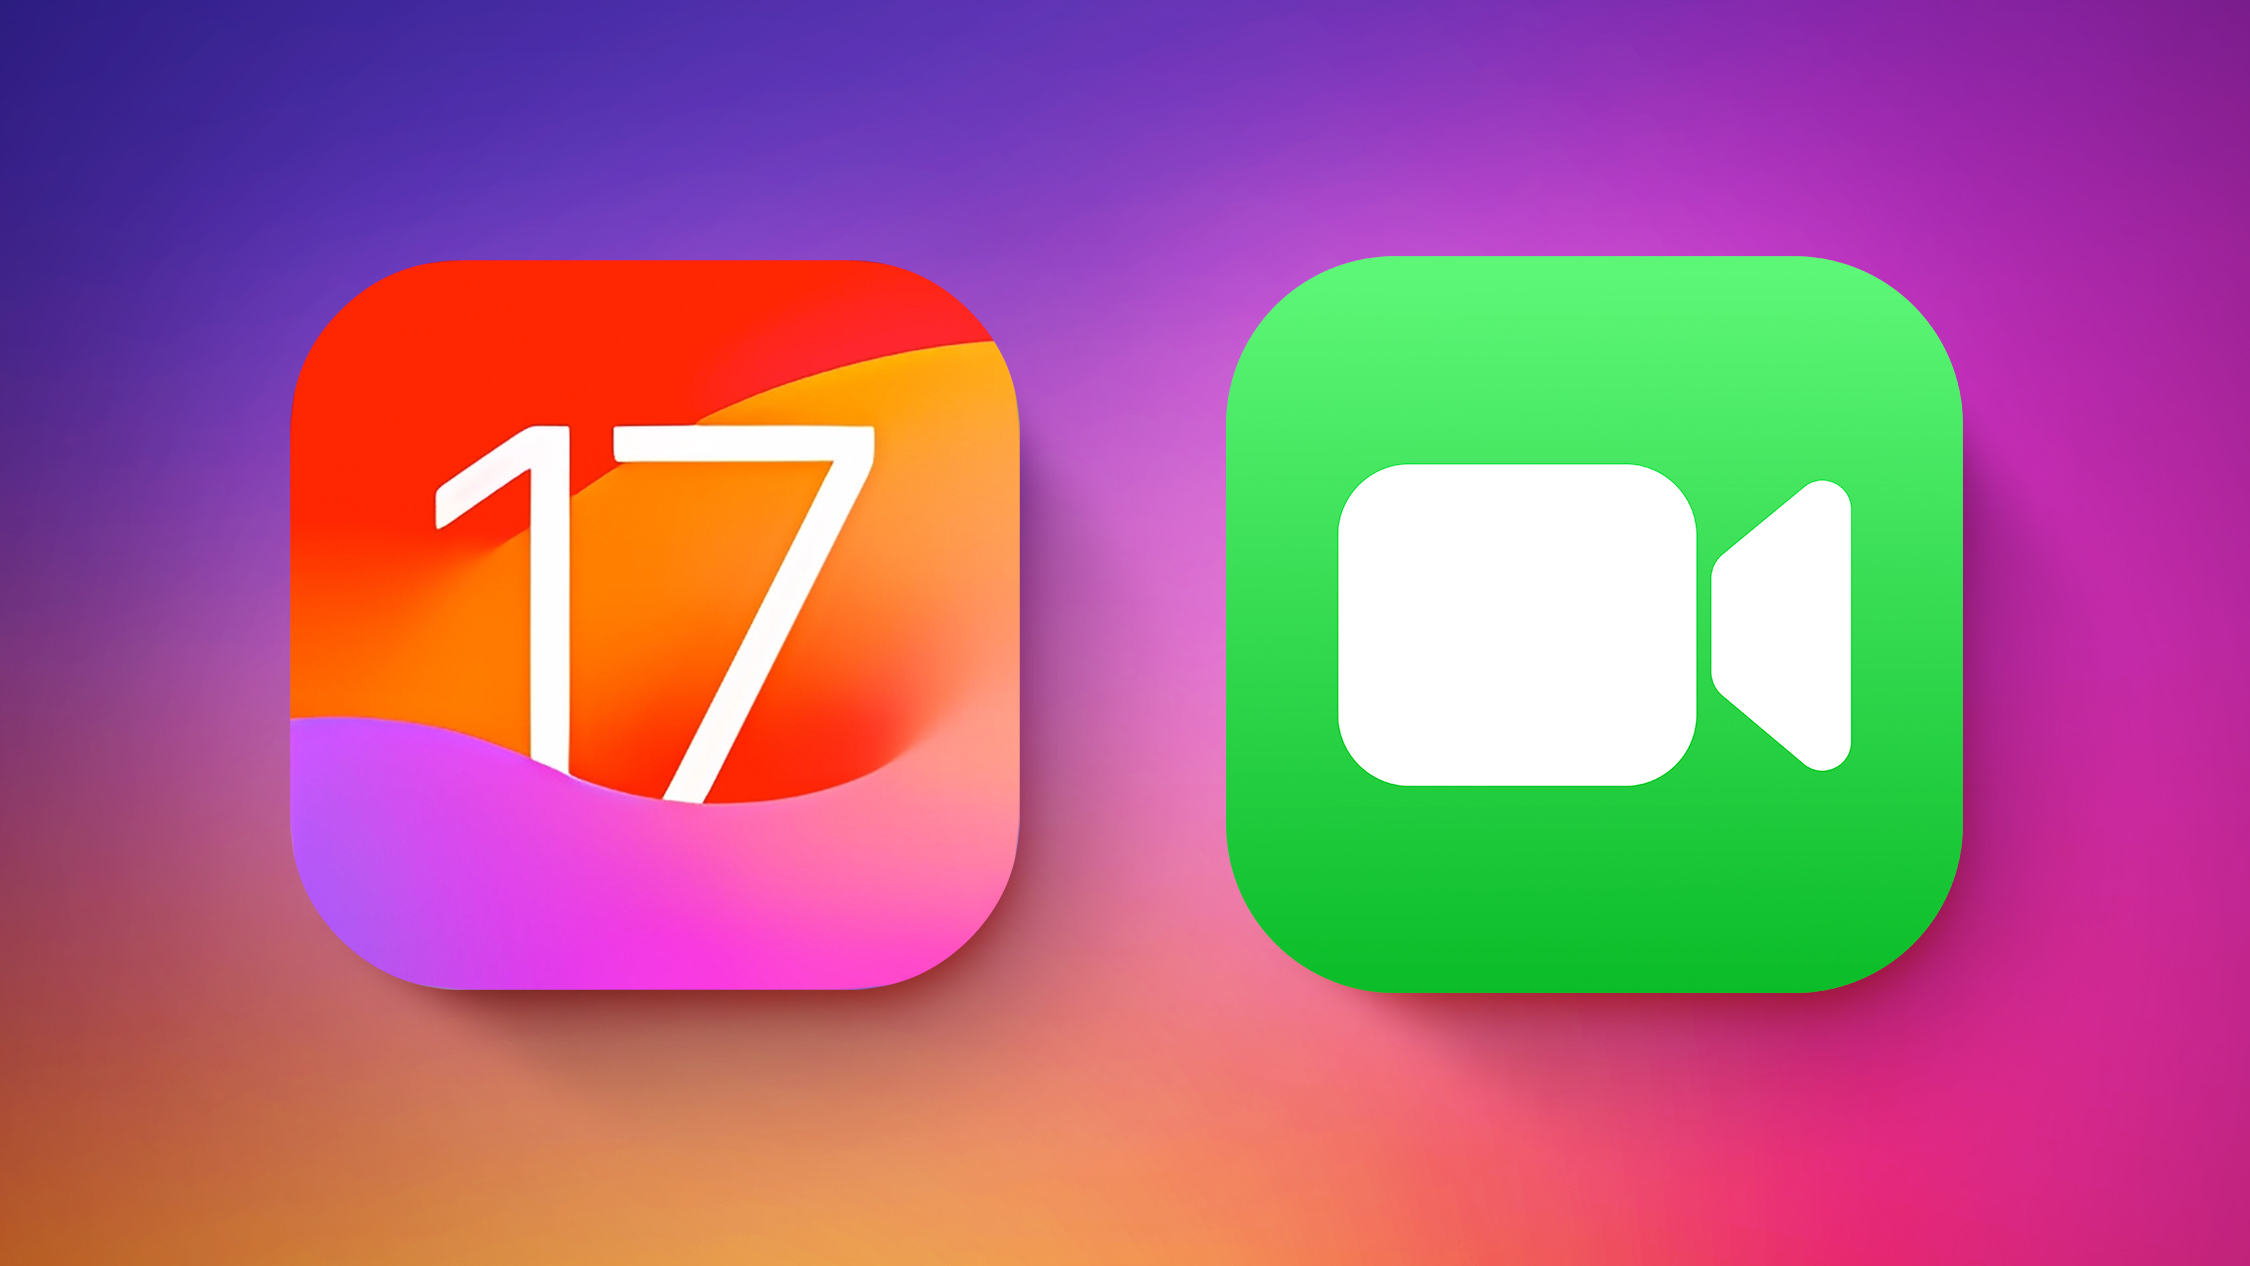 iOS 17 Communication Improvements: What’s New With Phone and FaceTime